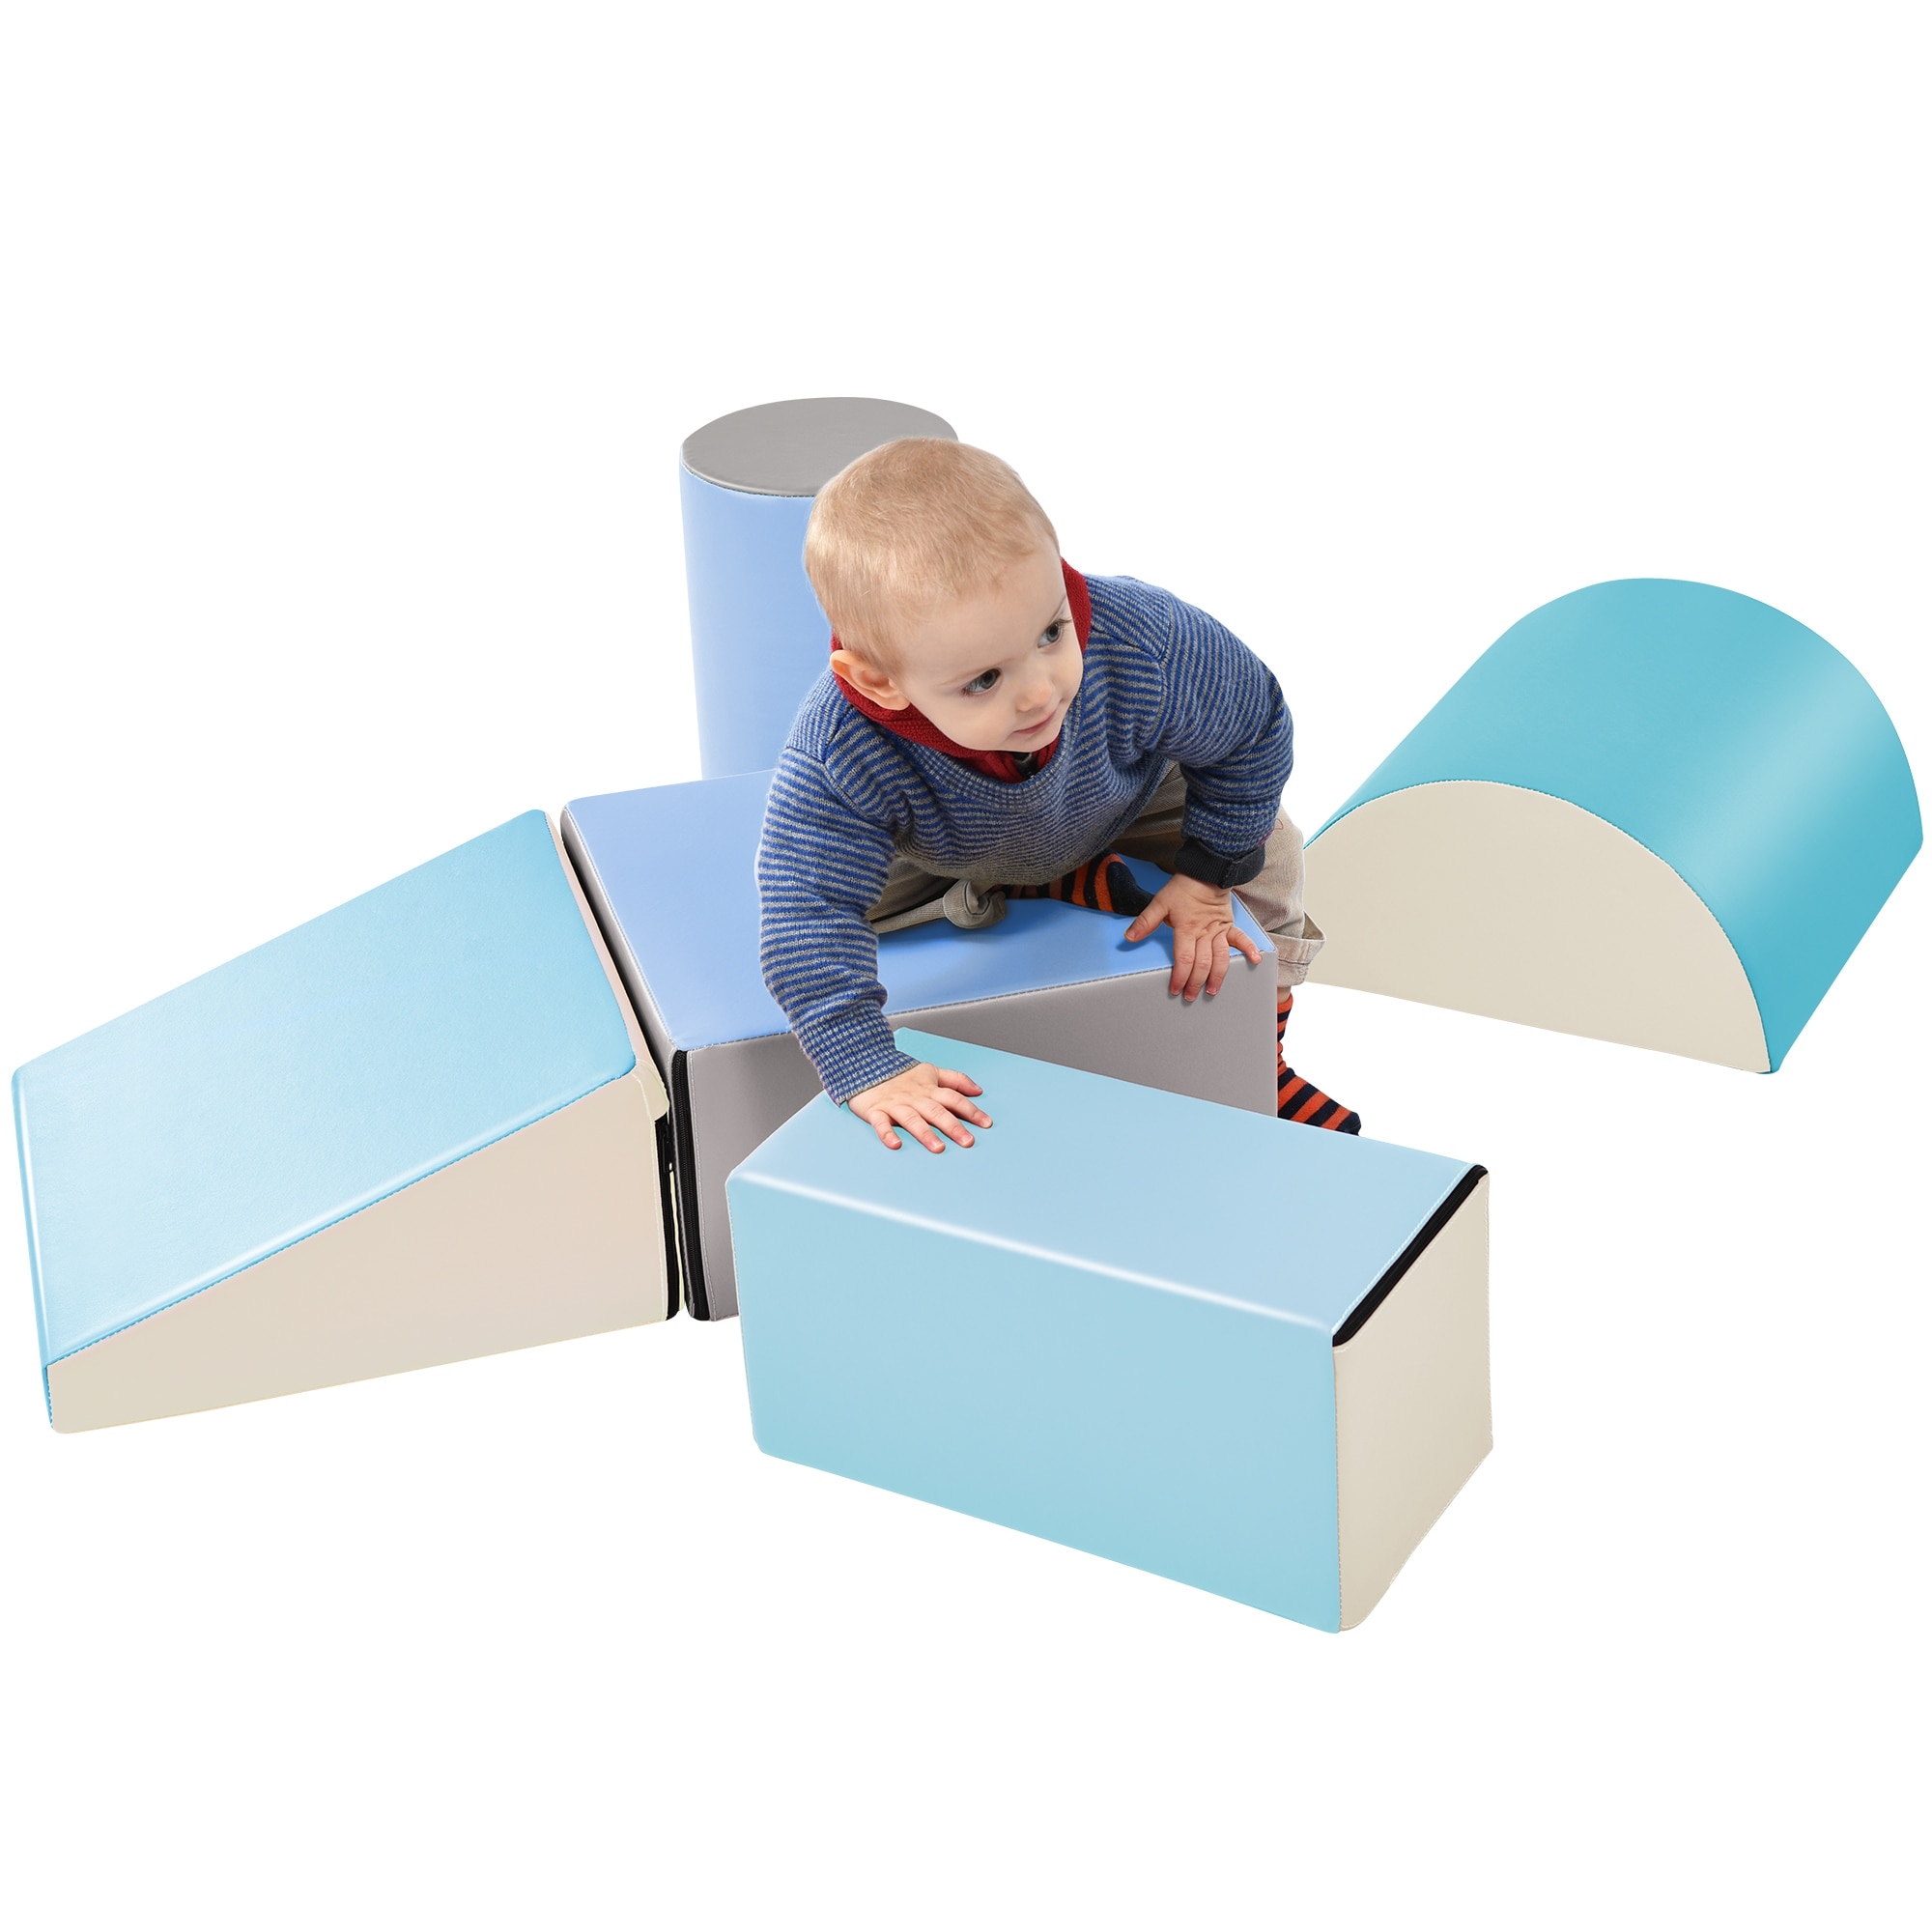 Soft Climb and Crawl Foam Playset, Stacking Foam Play Structure